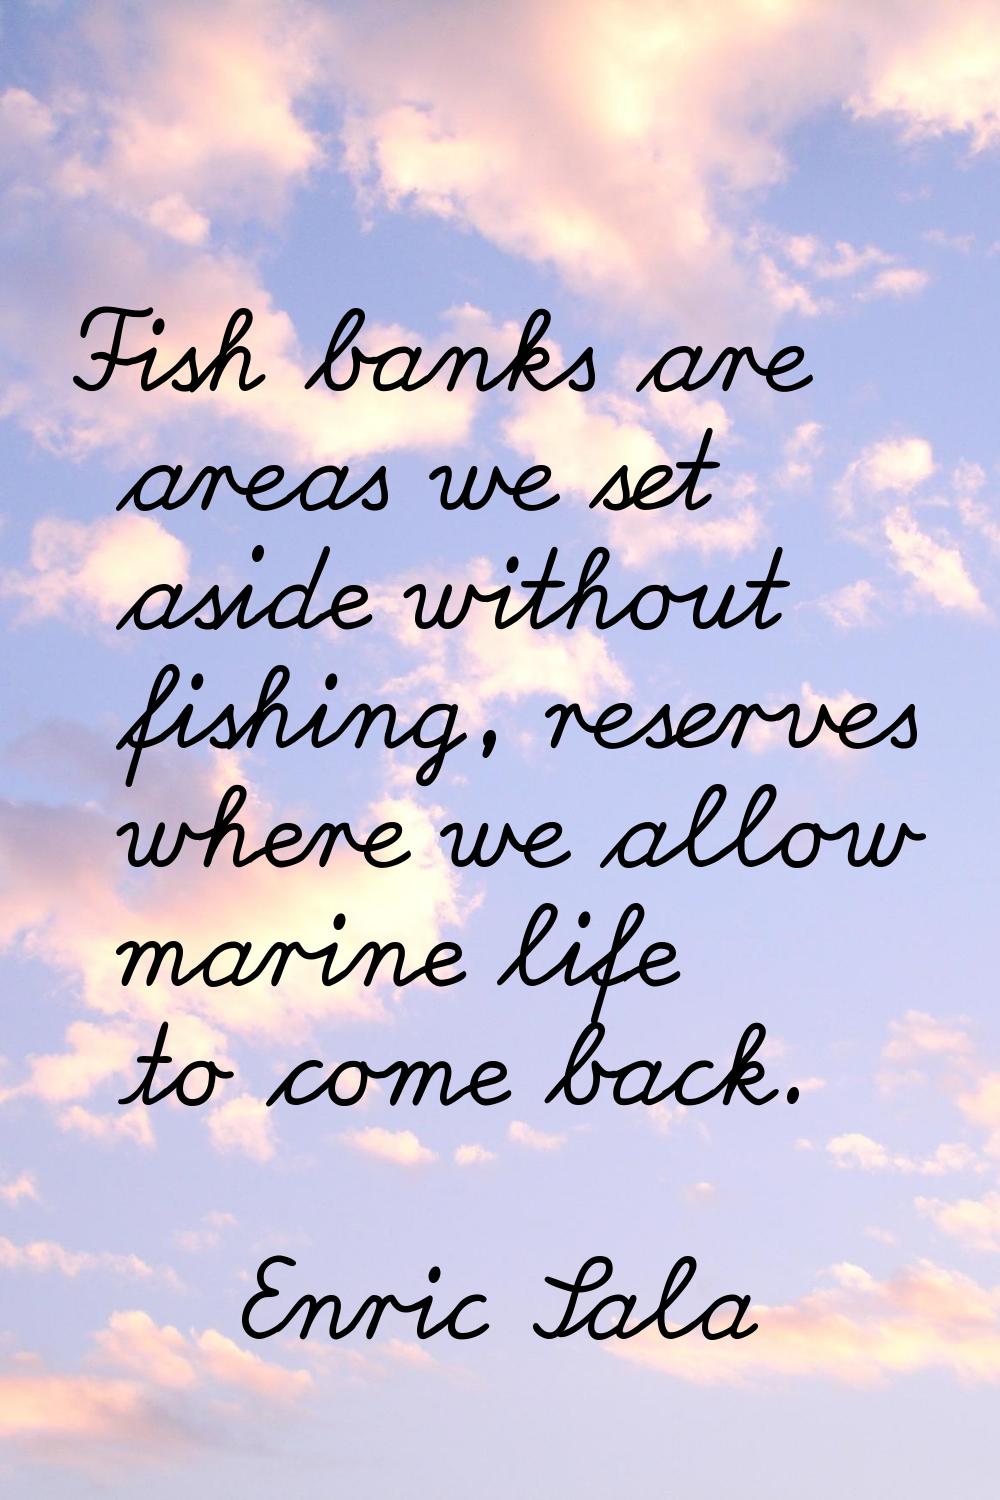 Fish banks are areas we set aside without fishing, reserves where we allow marine life to come back